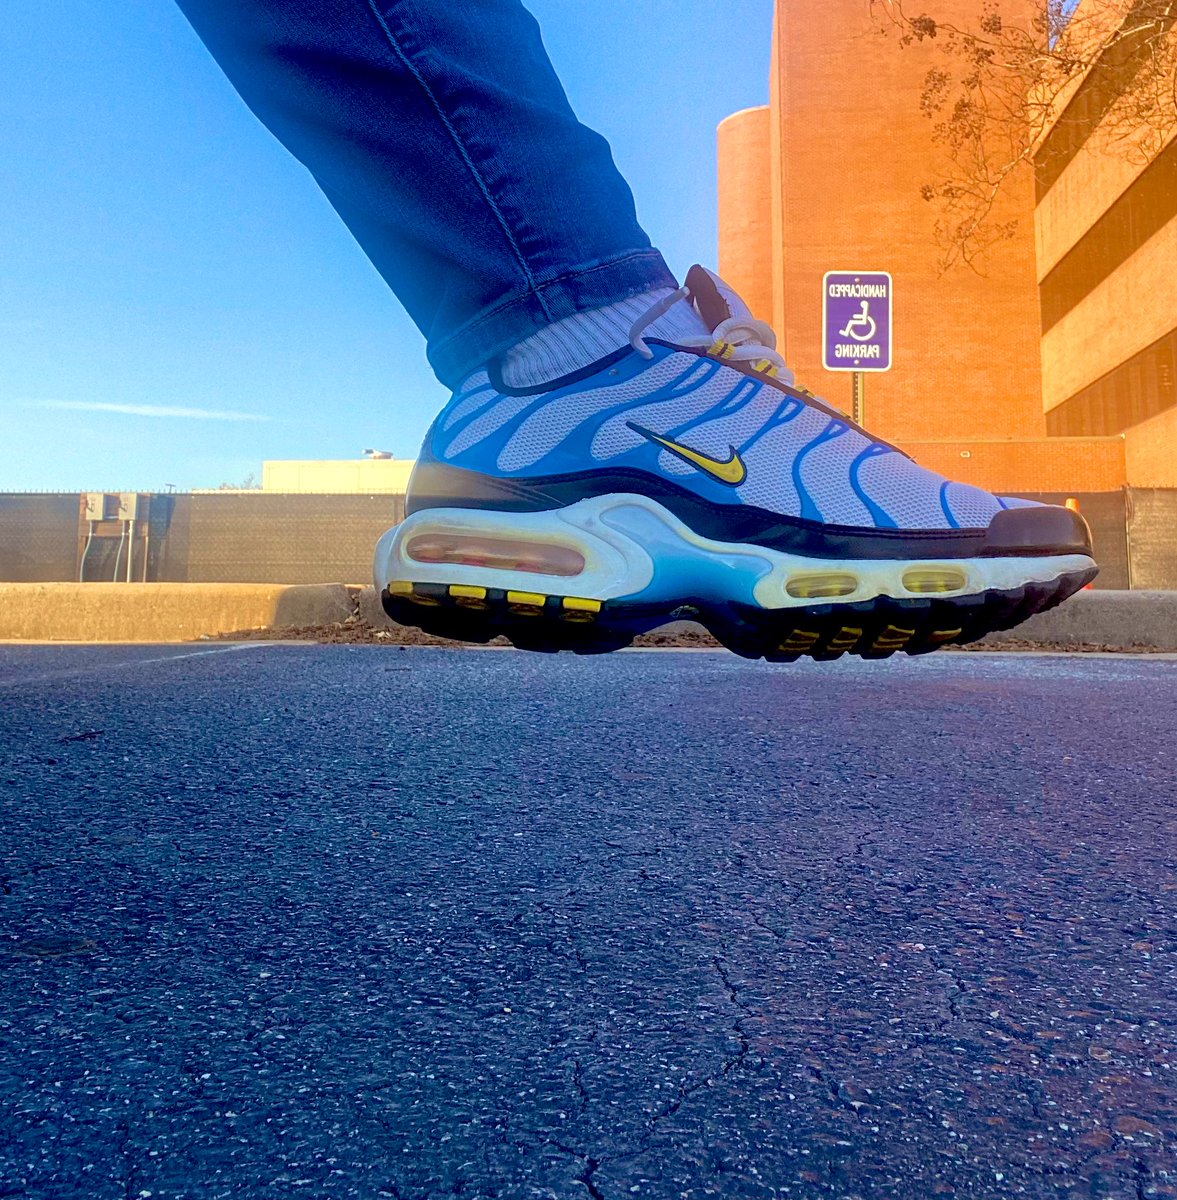 Day 21 of #marchMAXness 

2014 Air Max Plus Tn “Paradise”
#snkrsliveheatingup #snkrskickcheck #yoursneakersaredope #AIRMAX #AirMaxMonth